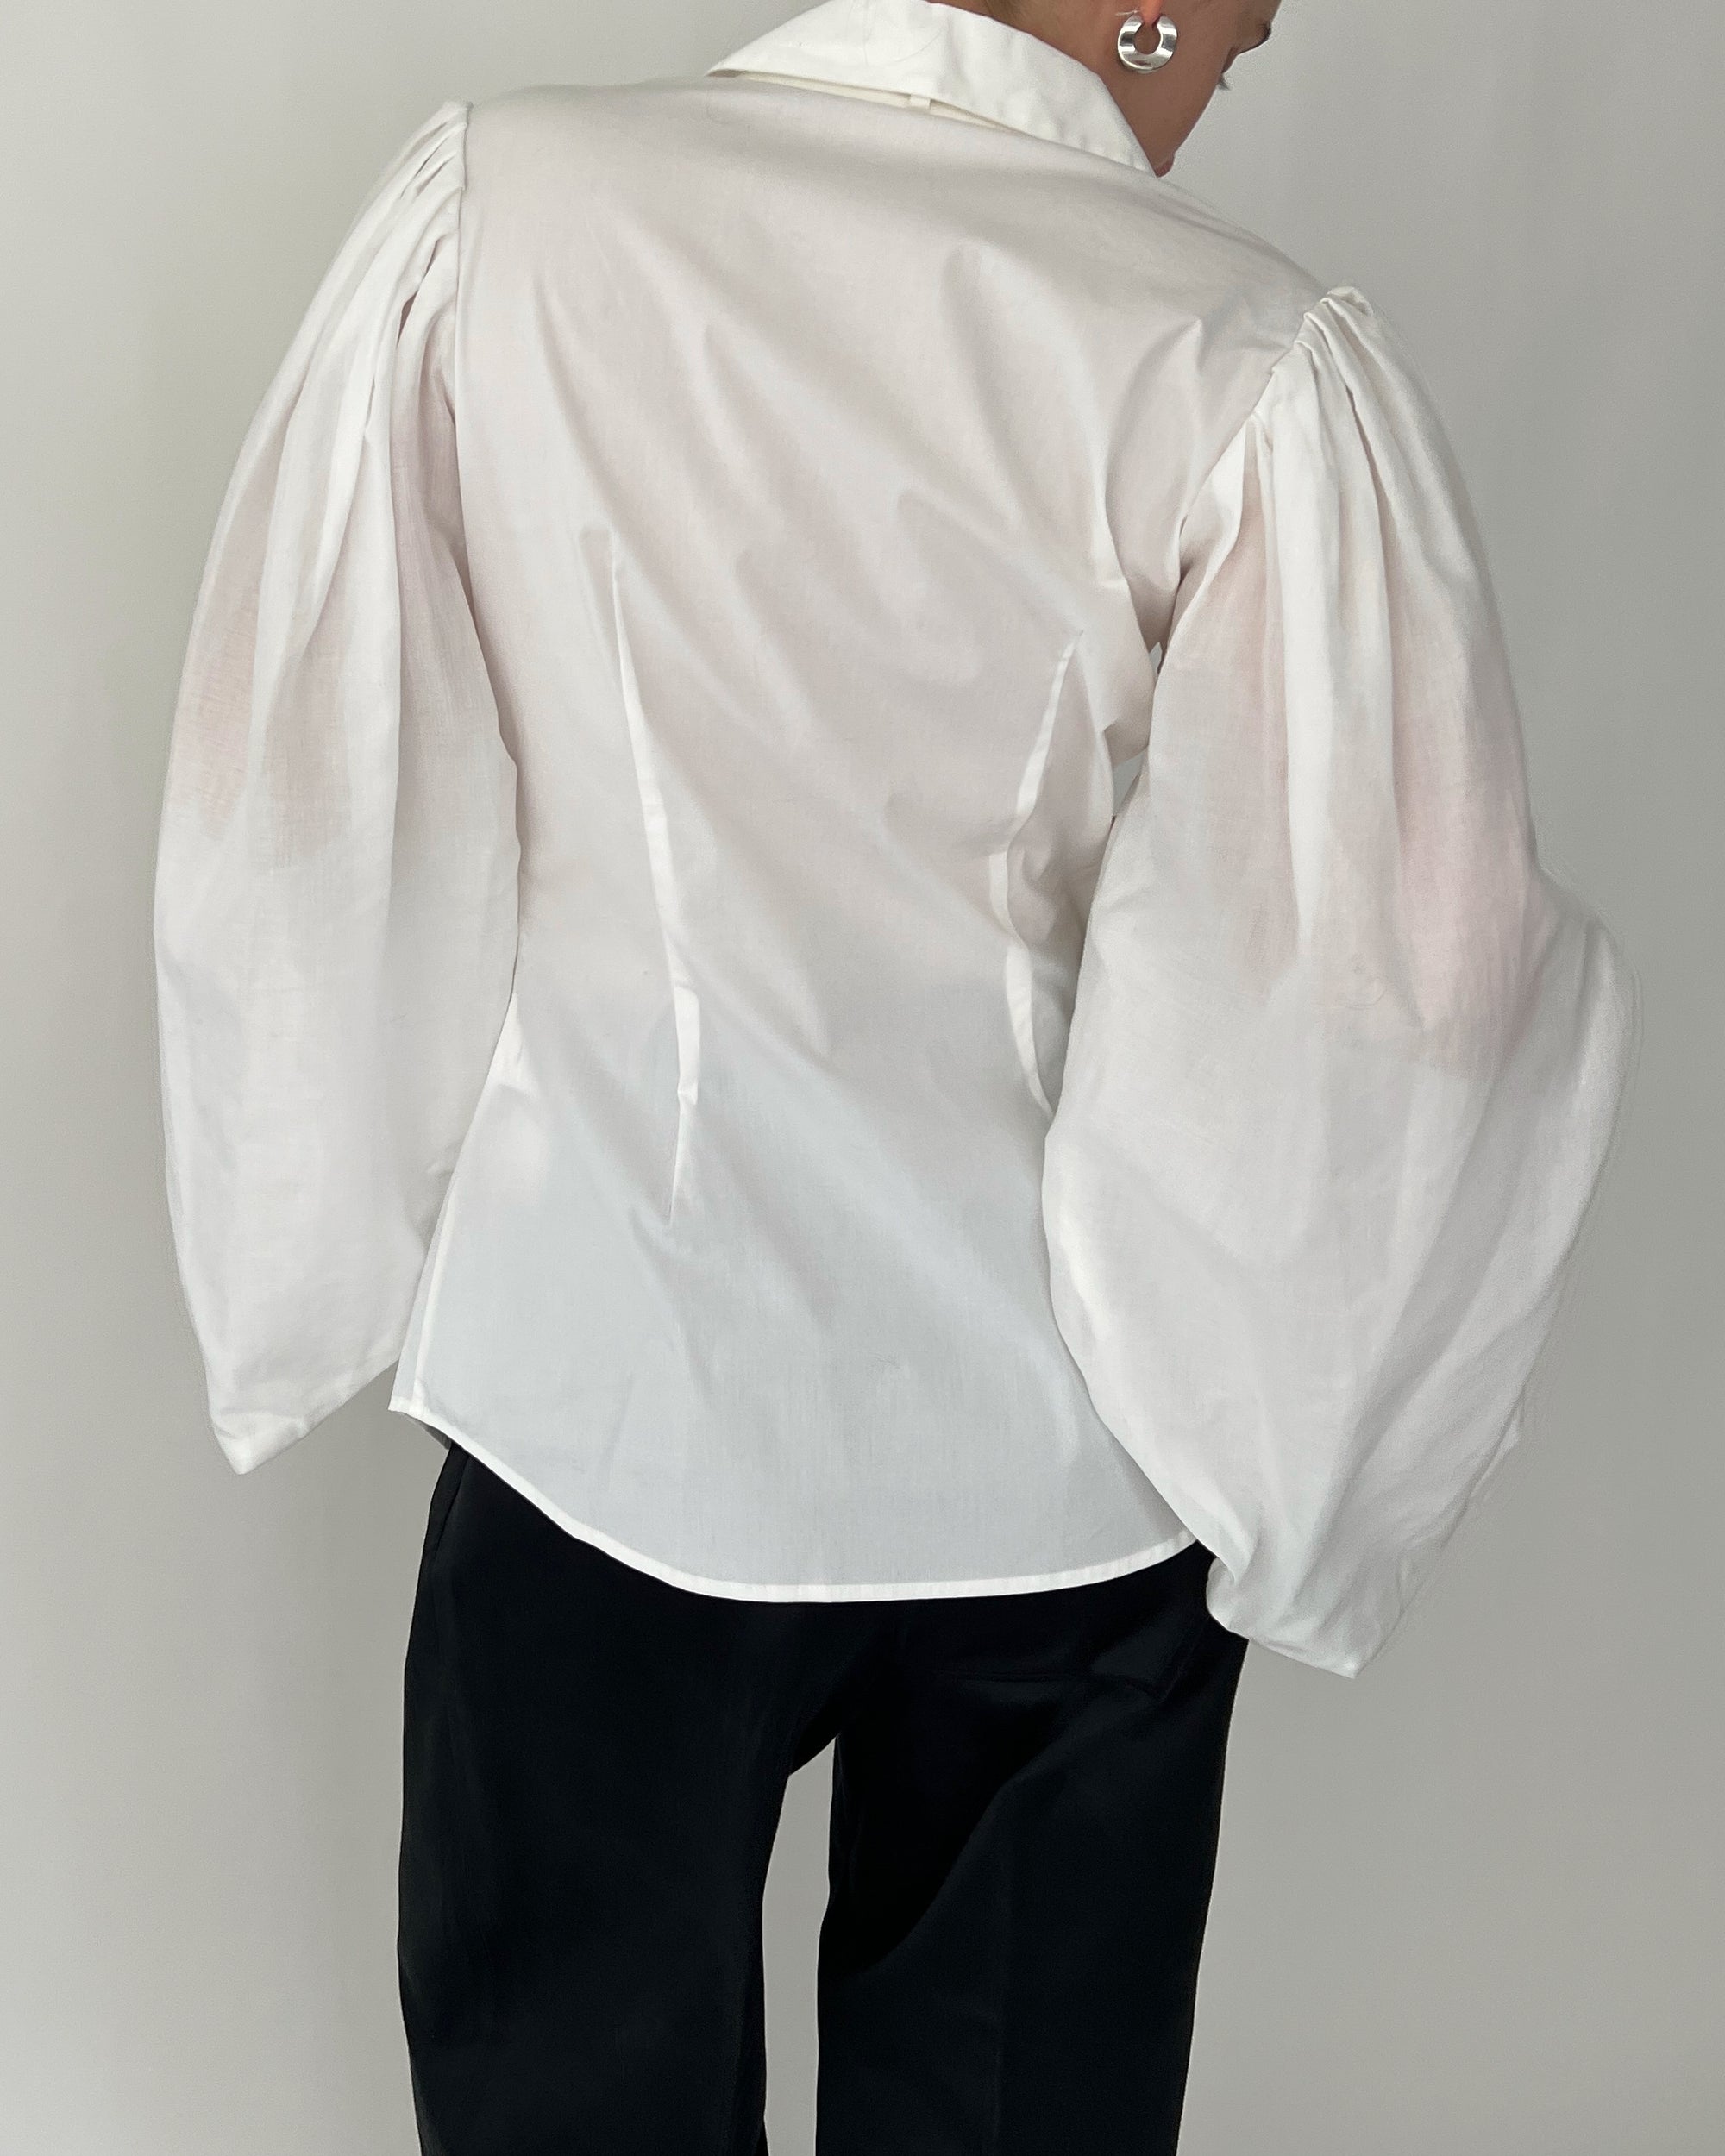 Vintage Anne Fontaine White Cape Sleeve Top